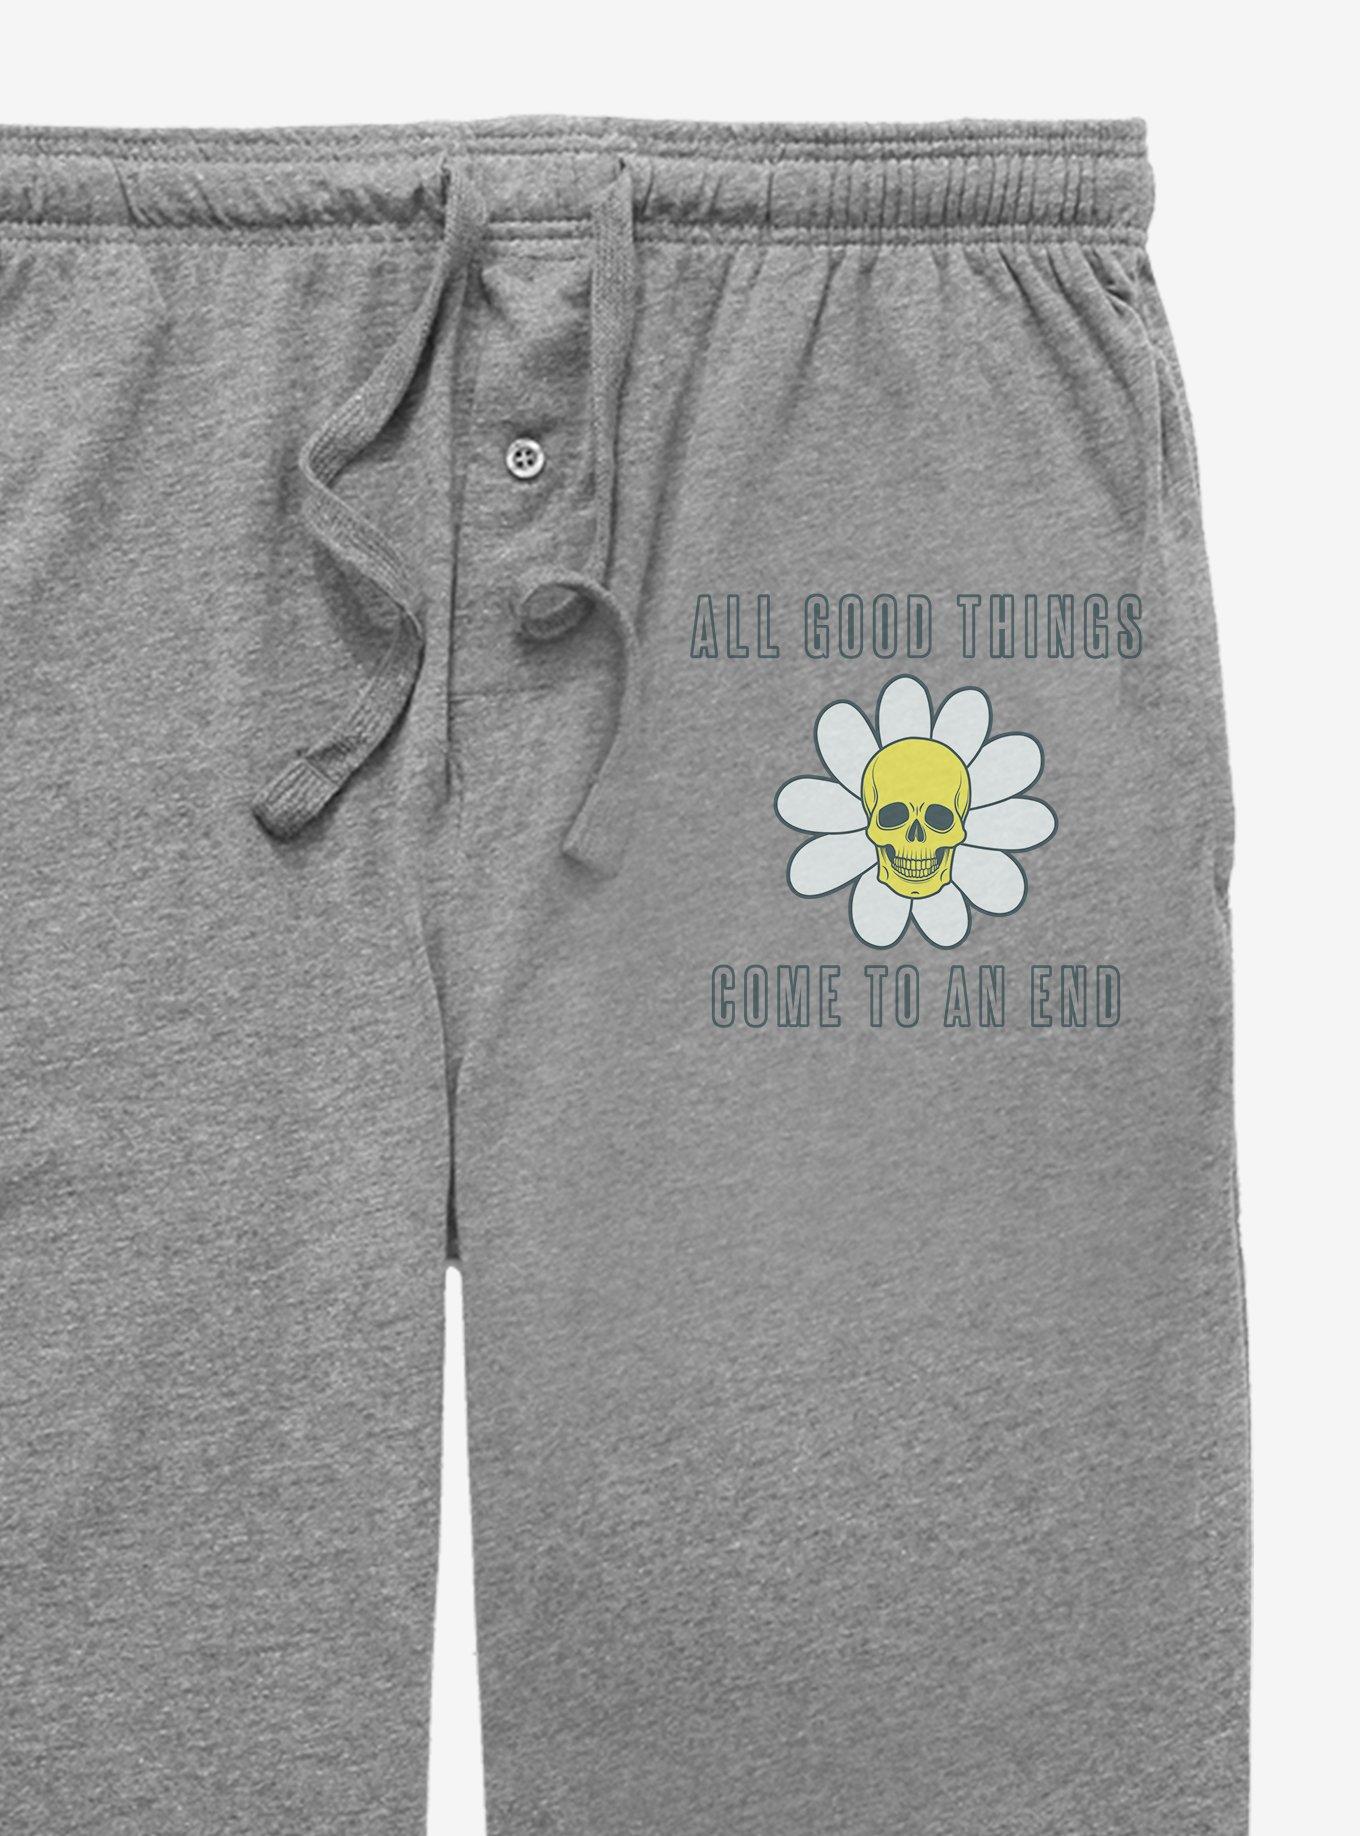 Cozy Collection Good Things Come To An End Pajama Pants, GRAPHITE HEATHER, alternate